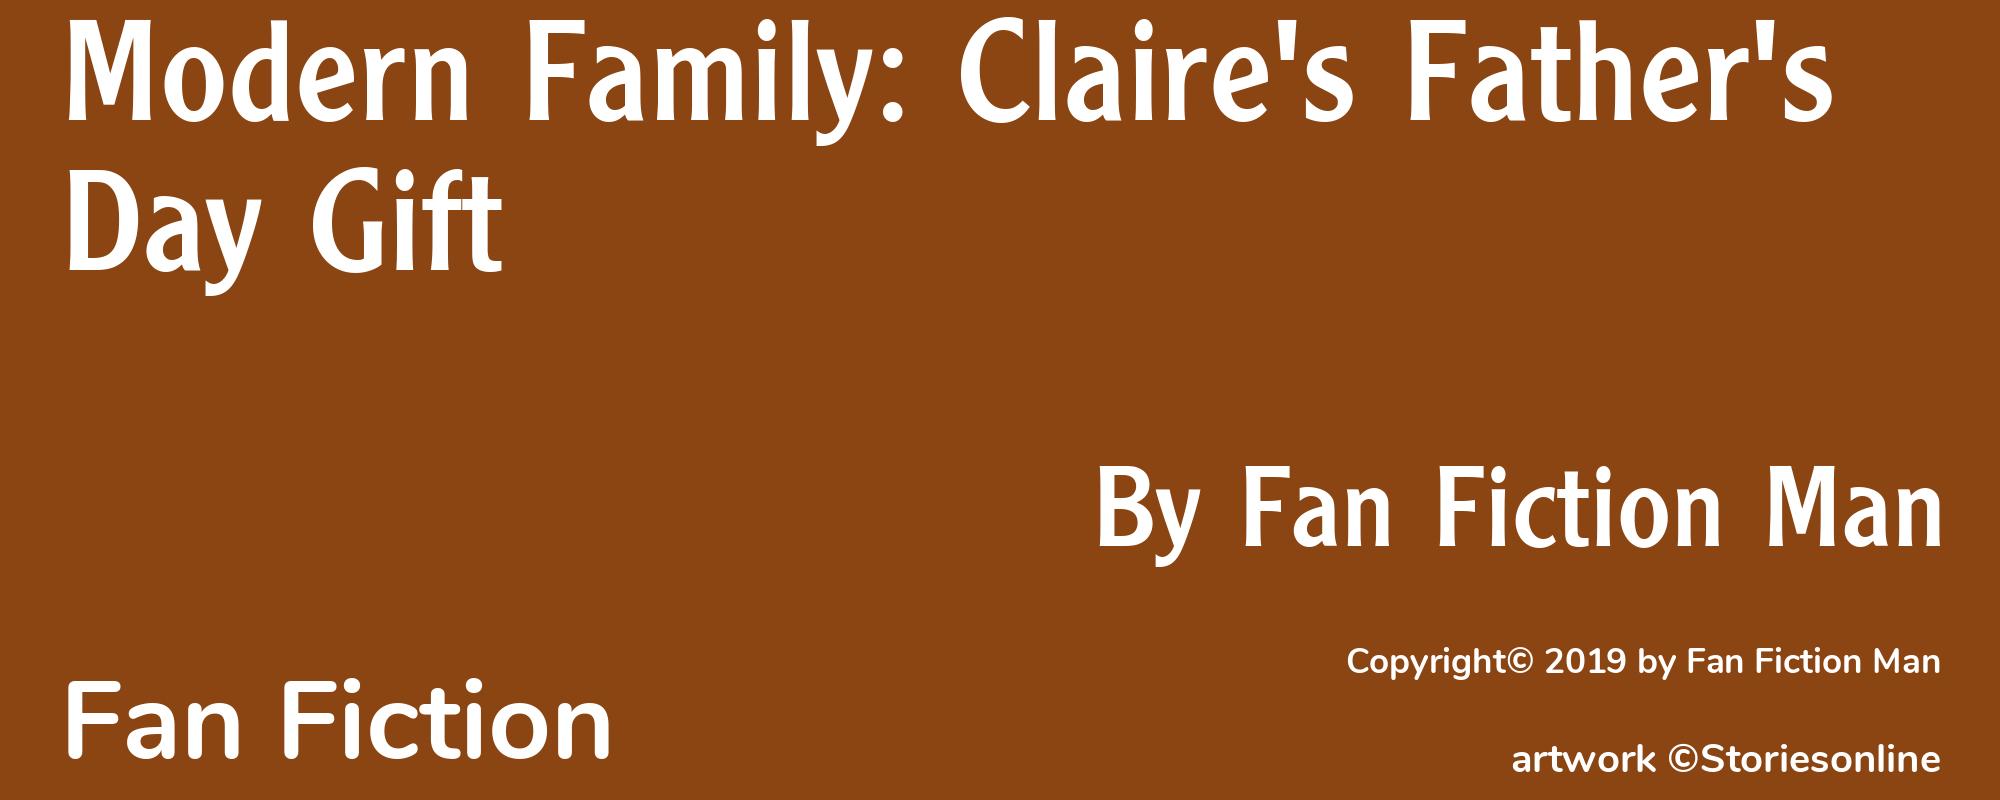 Modern Family: Claire's Father's Day Gift - Cover